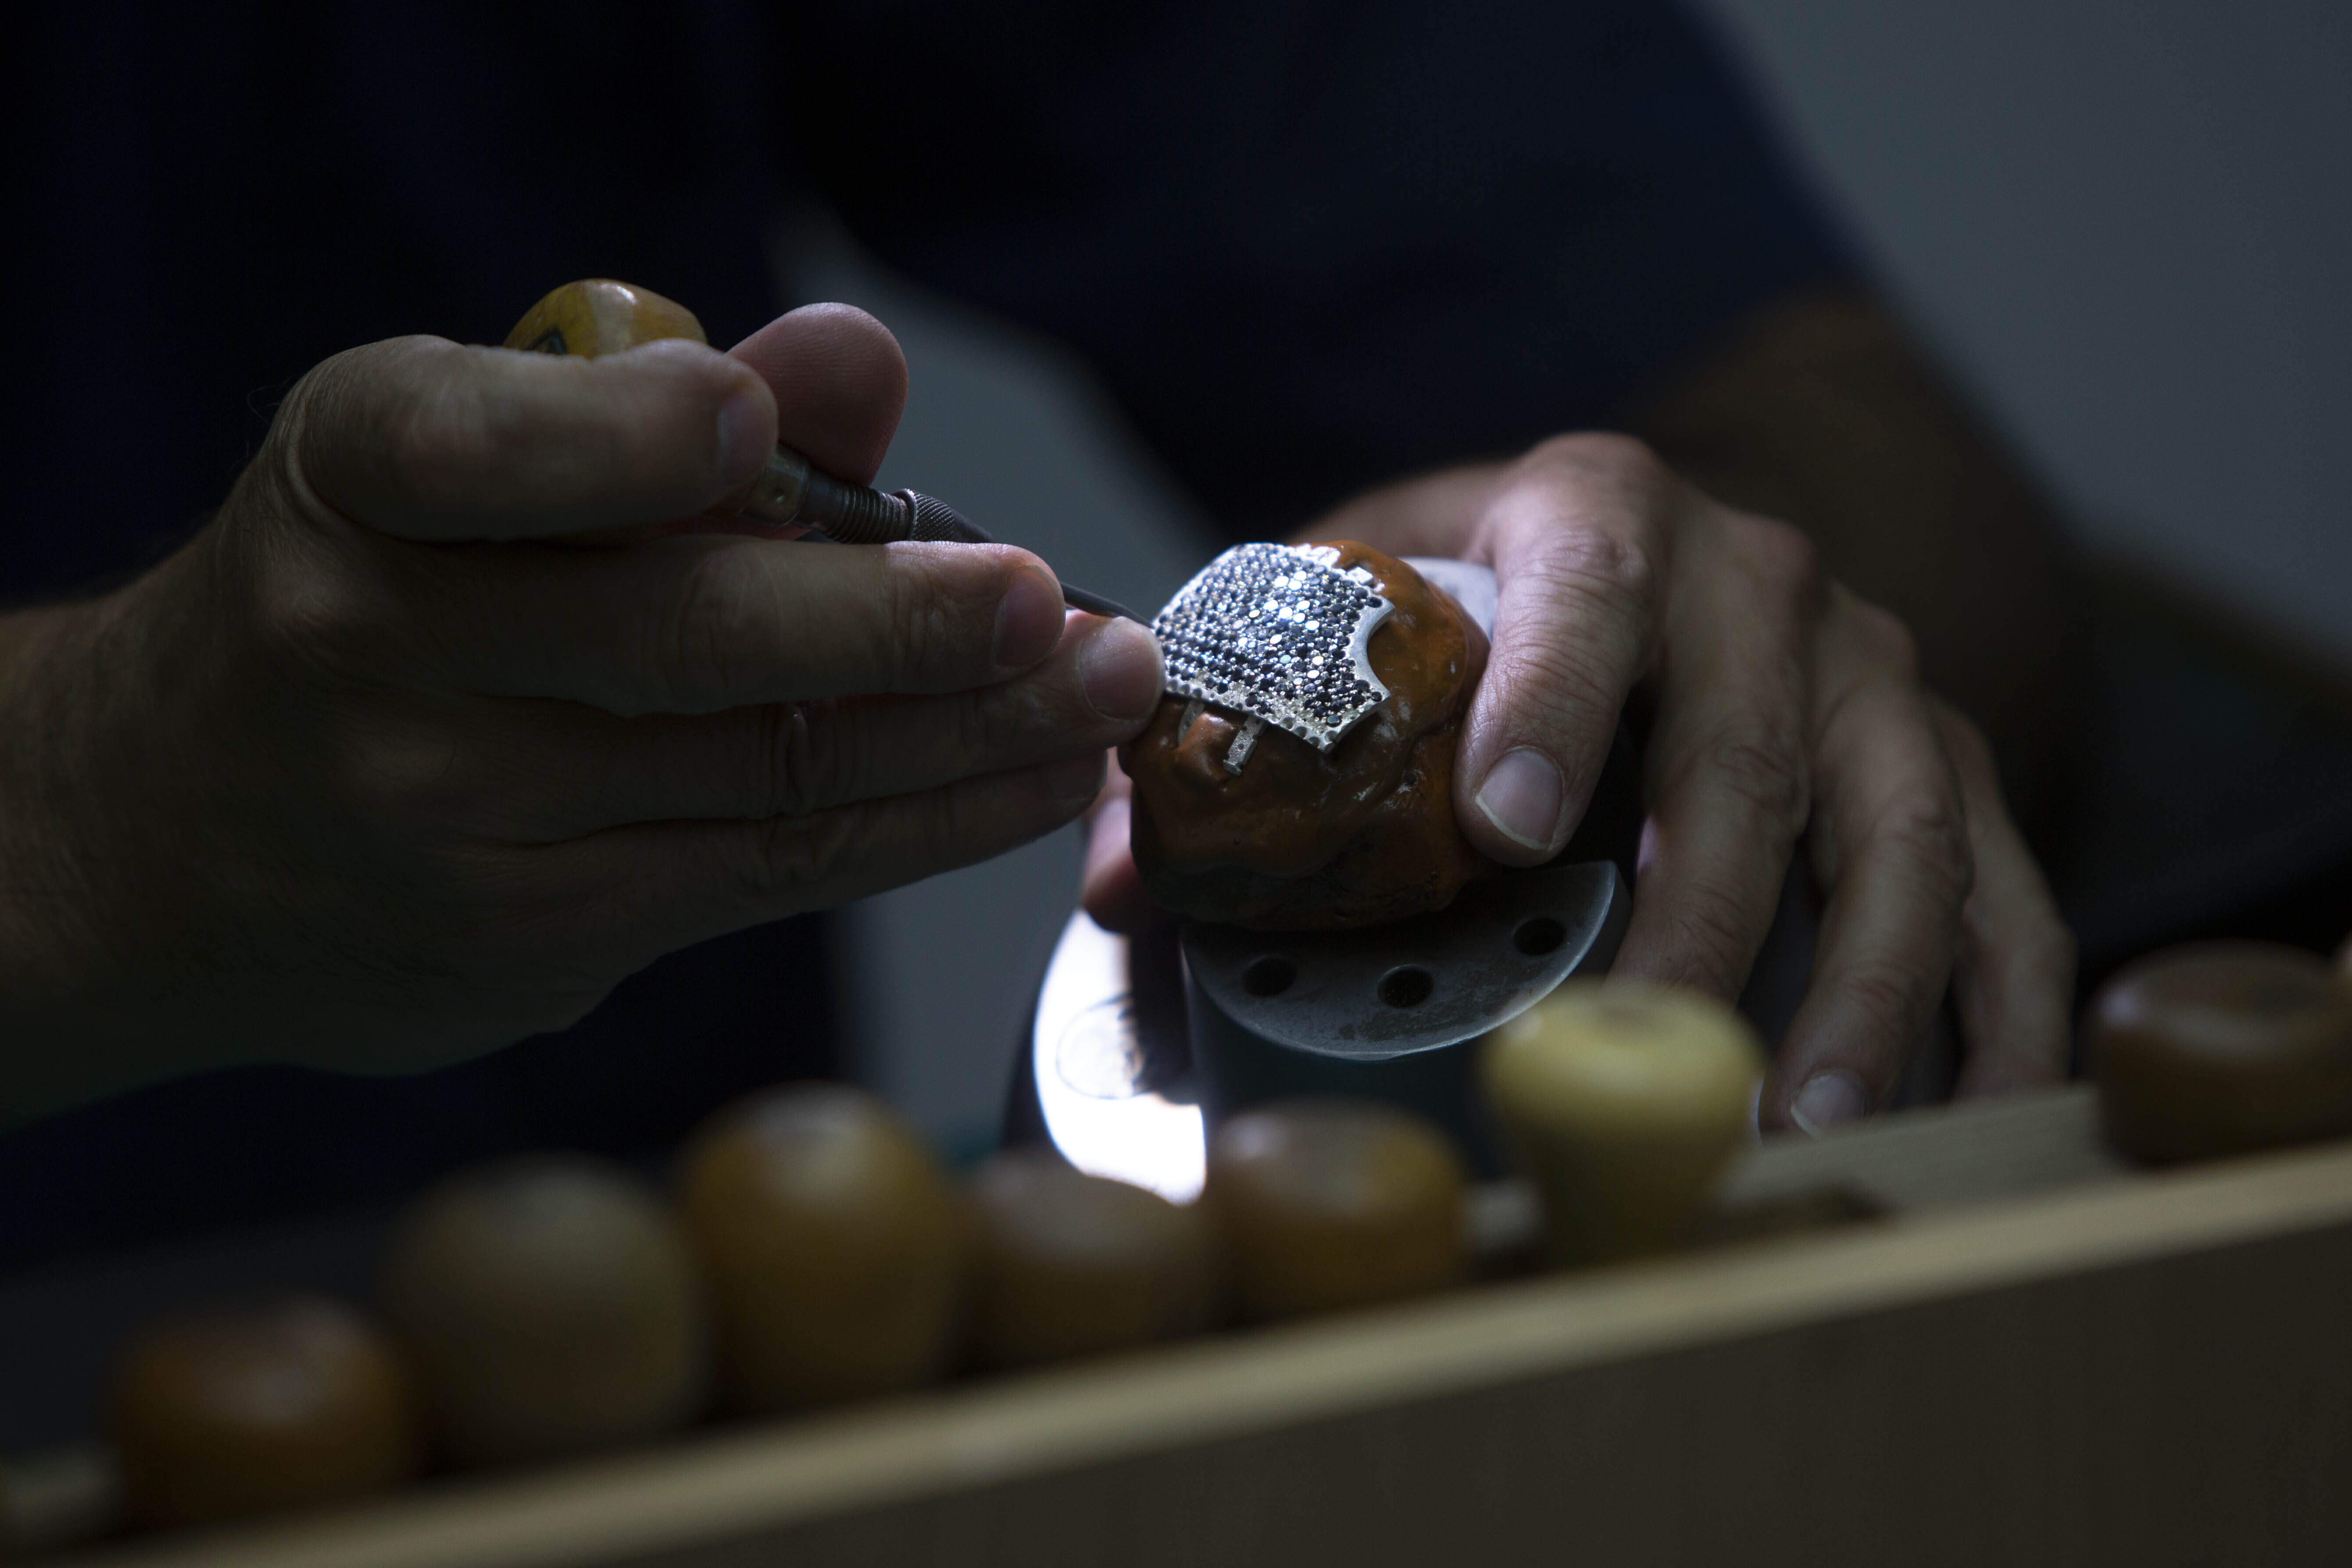 Israeil Jewellery Company makes worlds most expensive Diamond mask